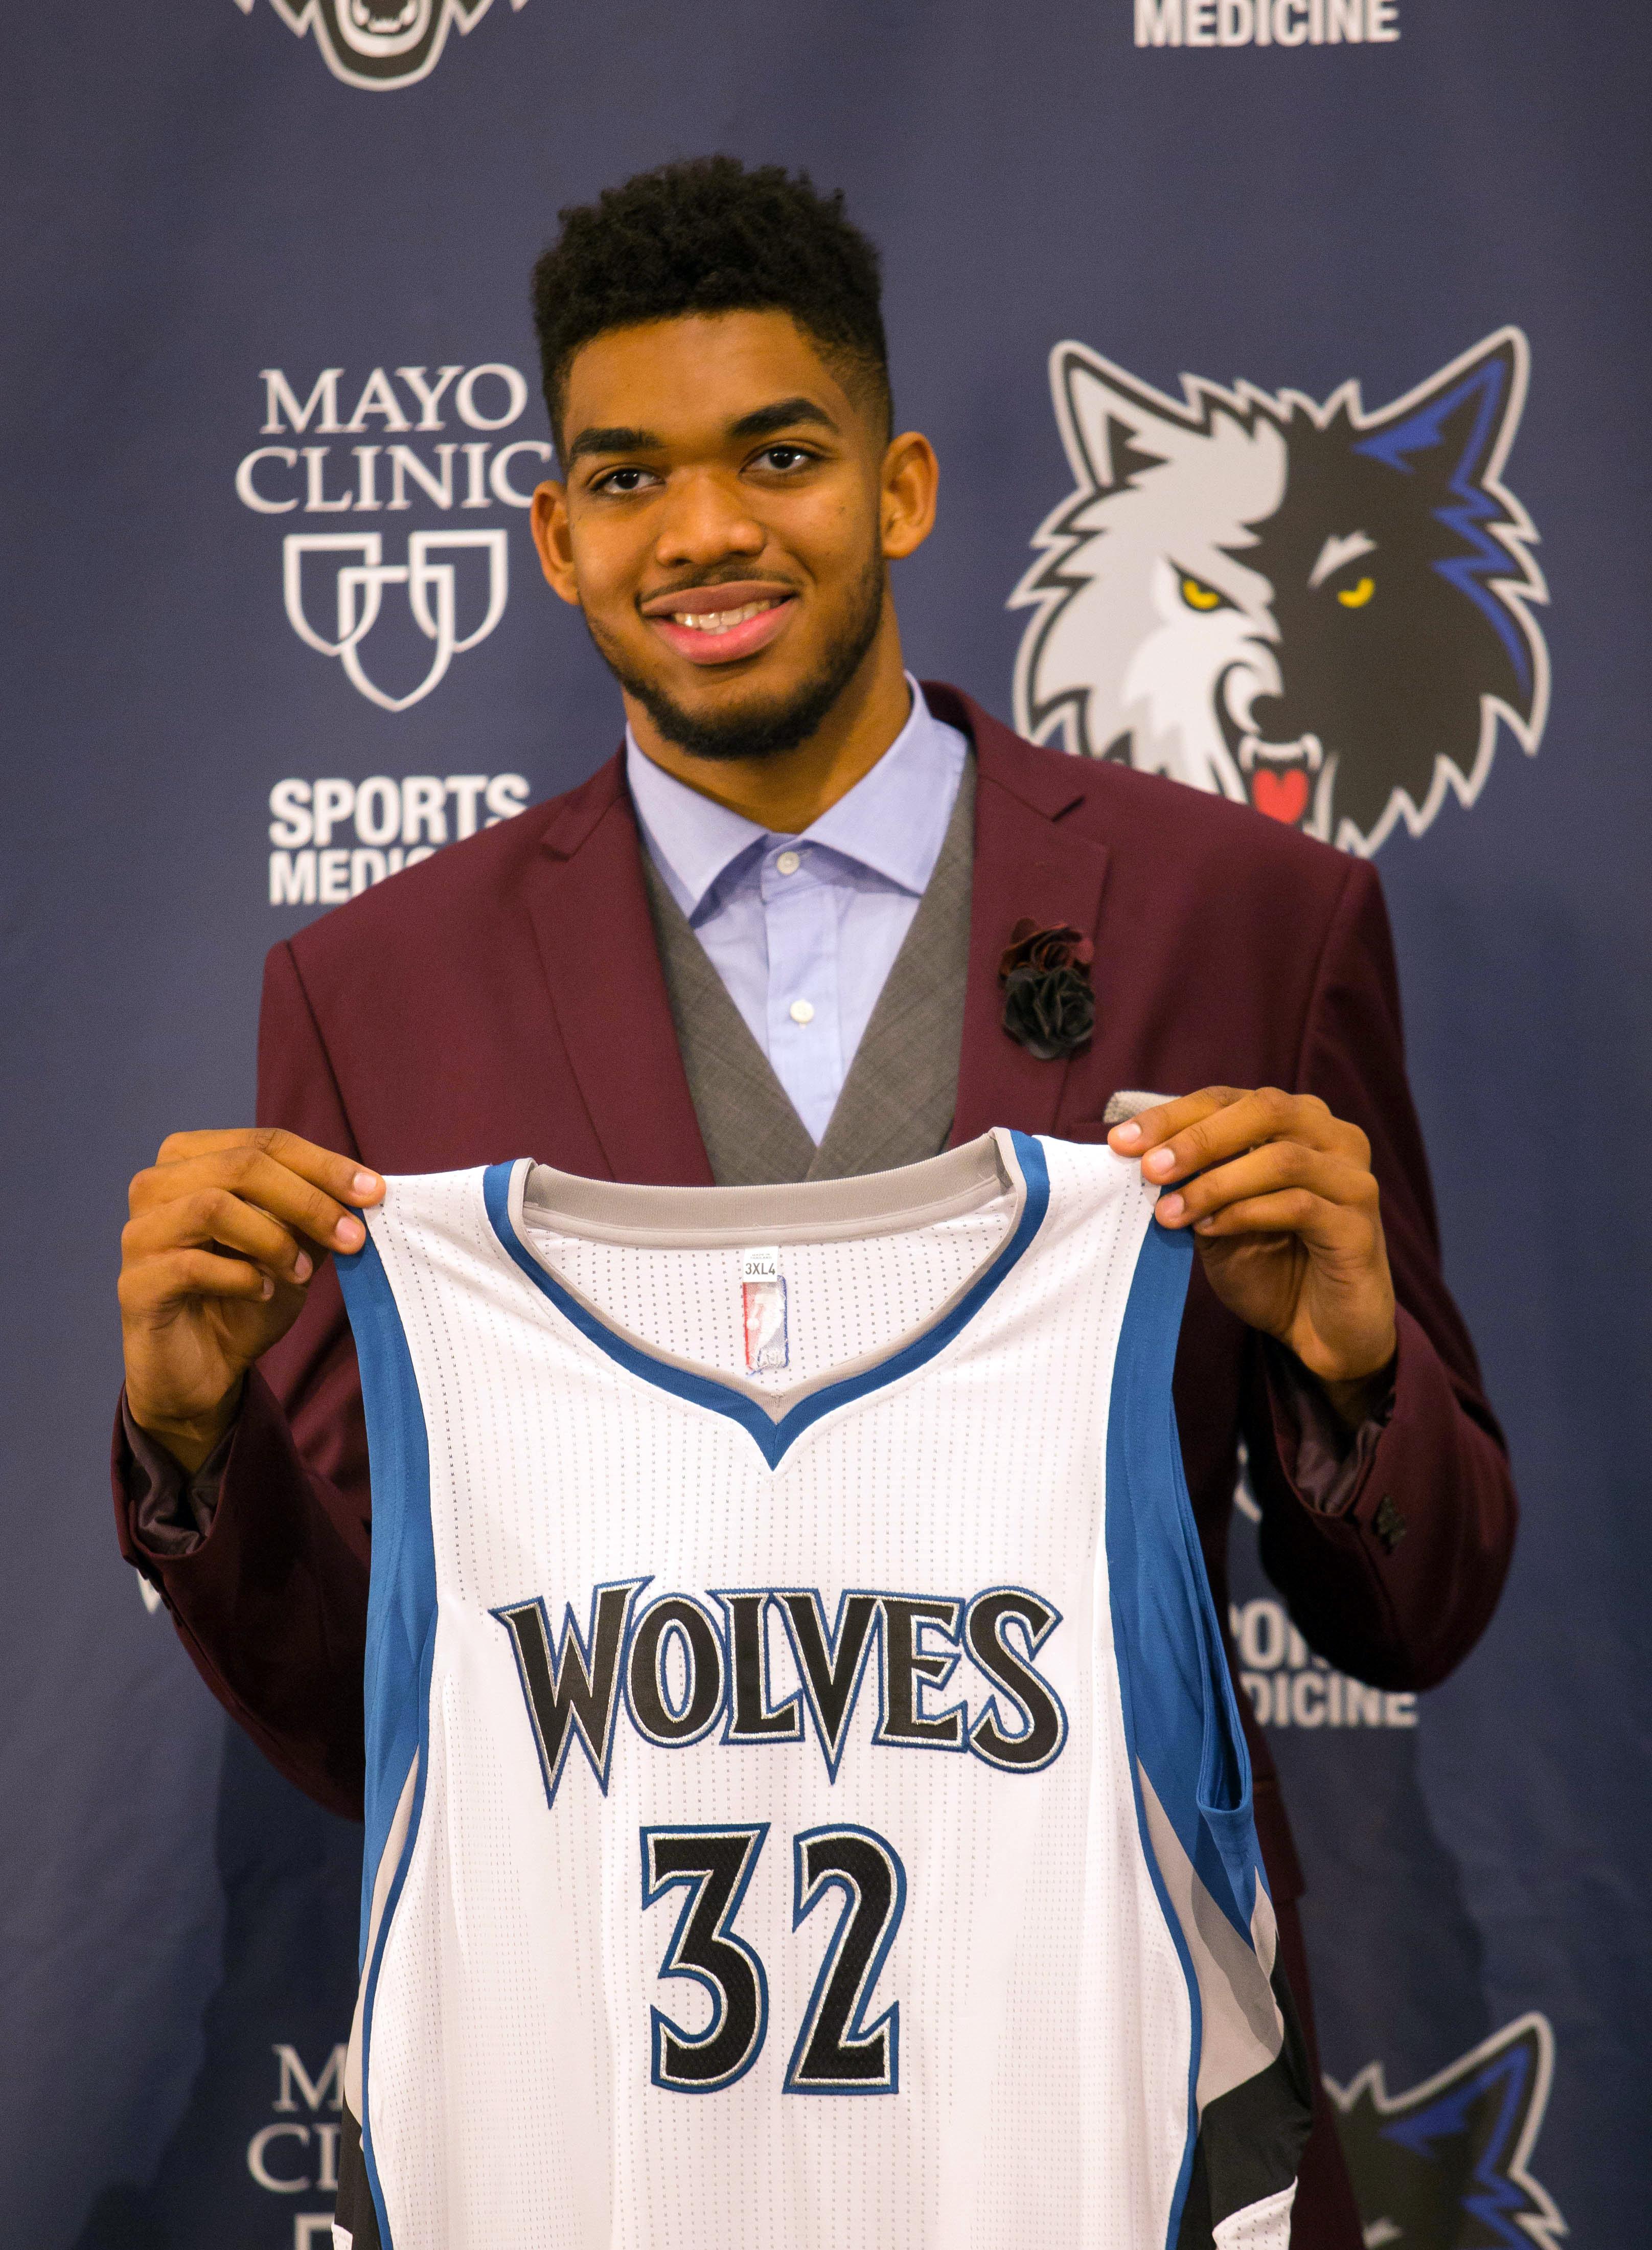 Karl Anthony Towns Signed MN Timberwolves Jersey for sale at